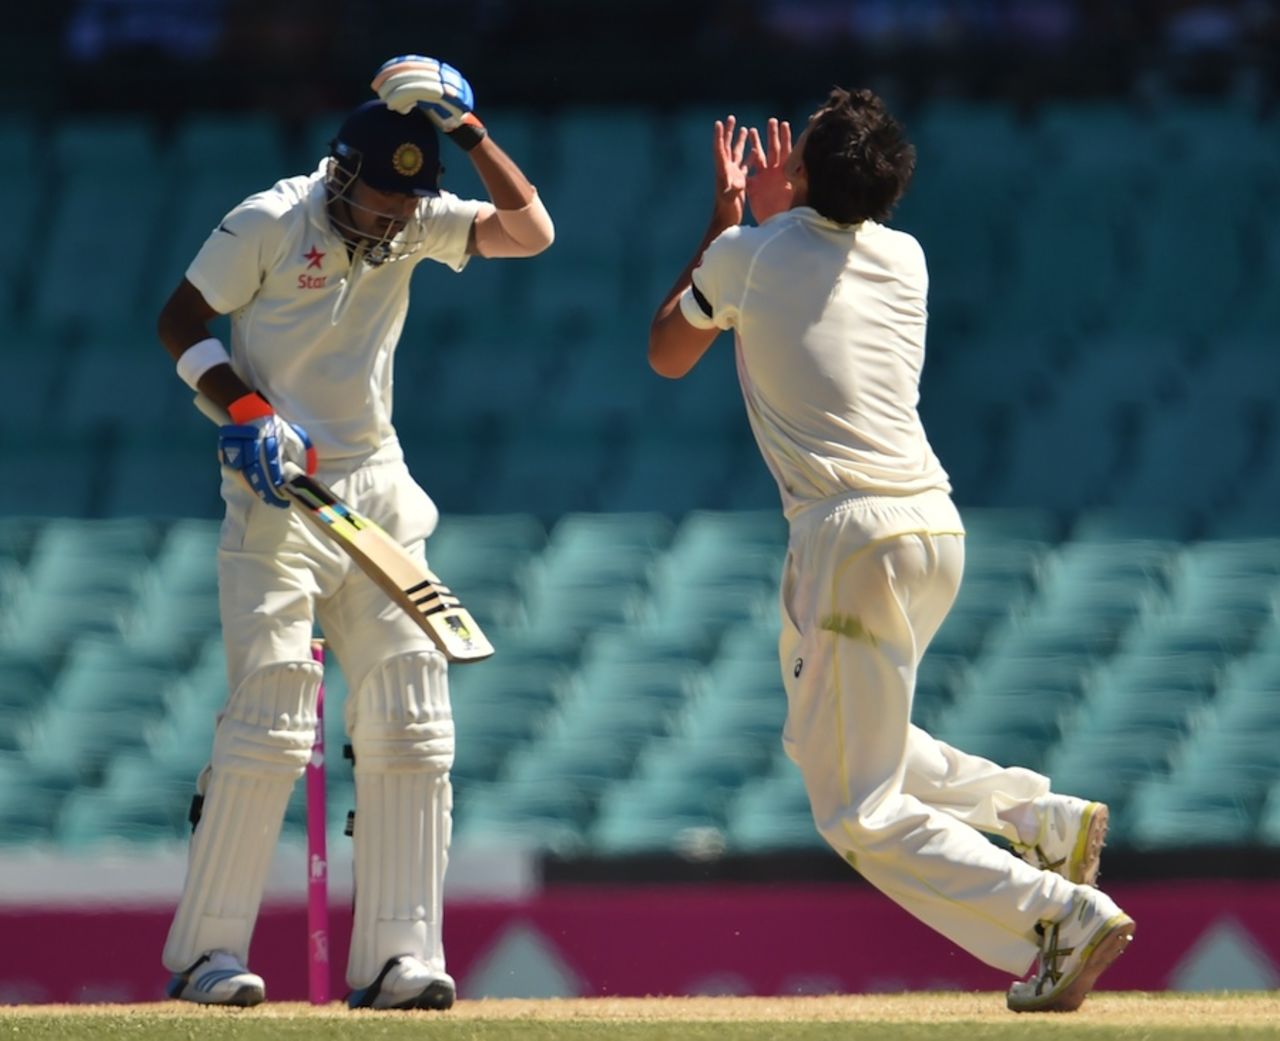 Mitchell Starc prepares to catch KL Rahul's top-edged pull, Australia v India, 4th Test, Sydney, 3rd day, January 8, 2015